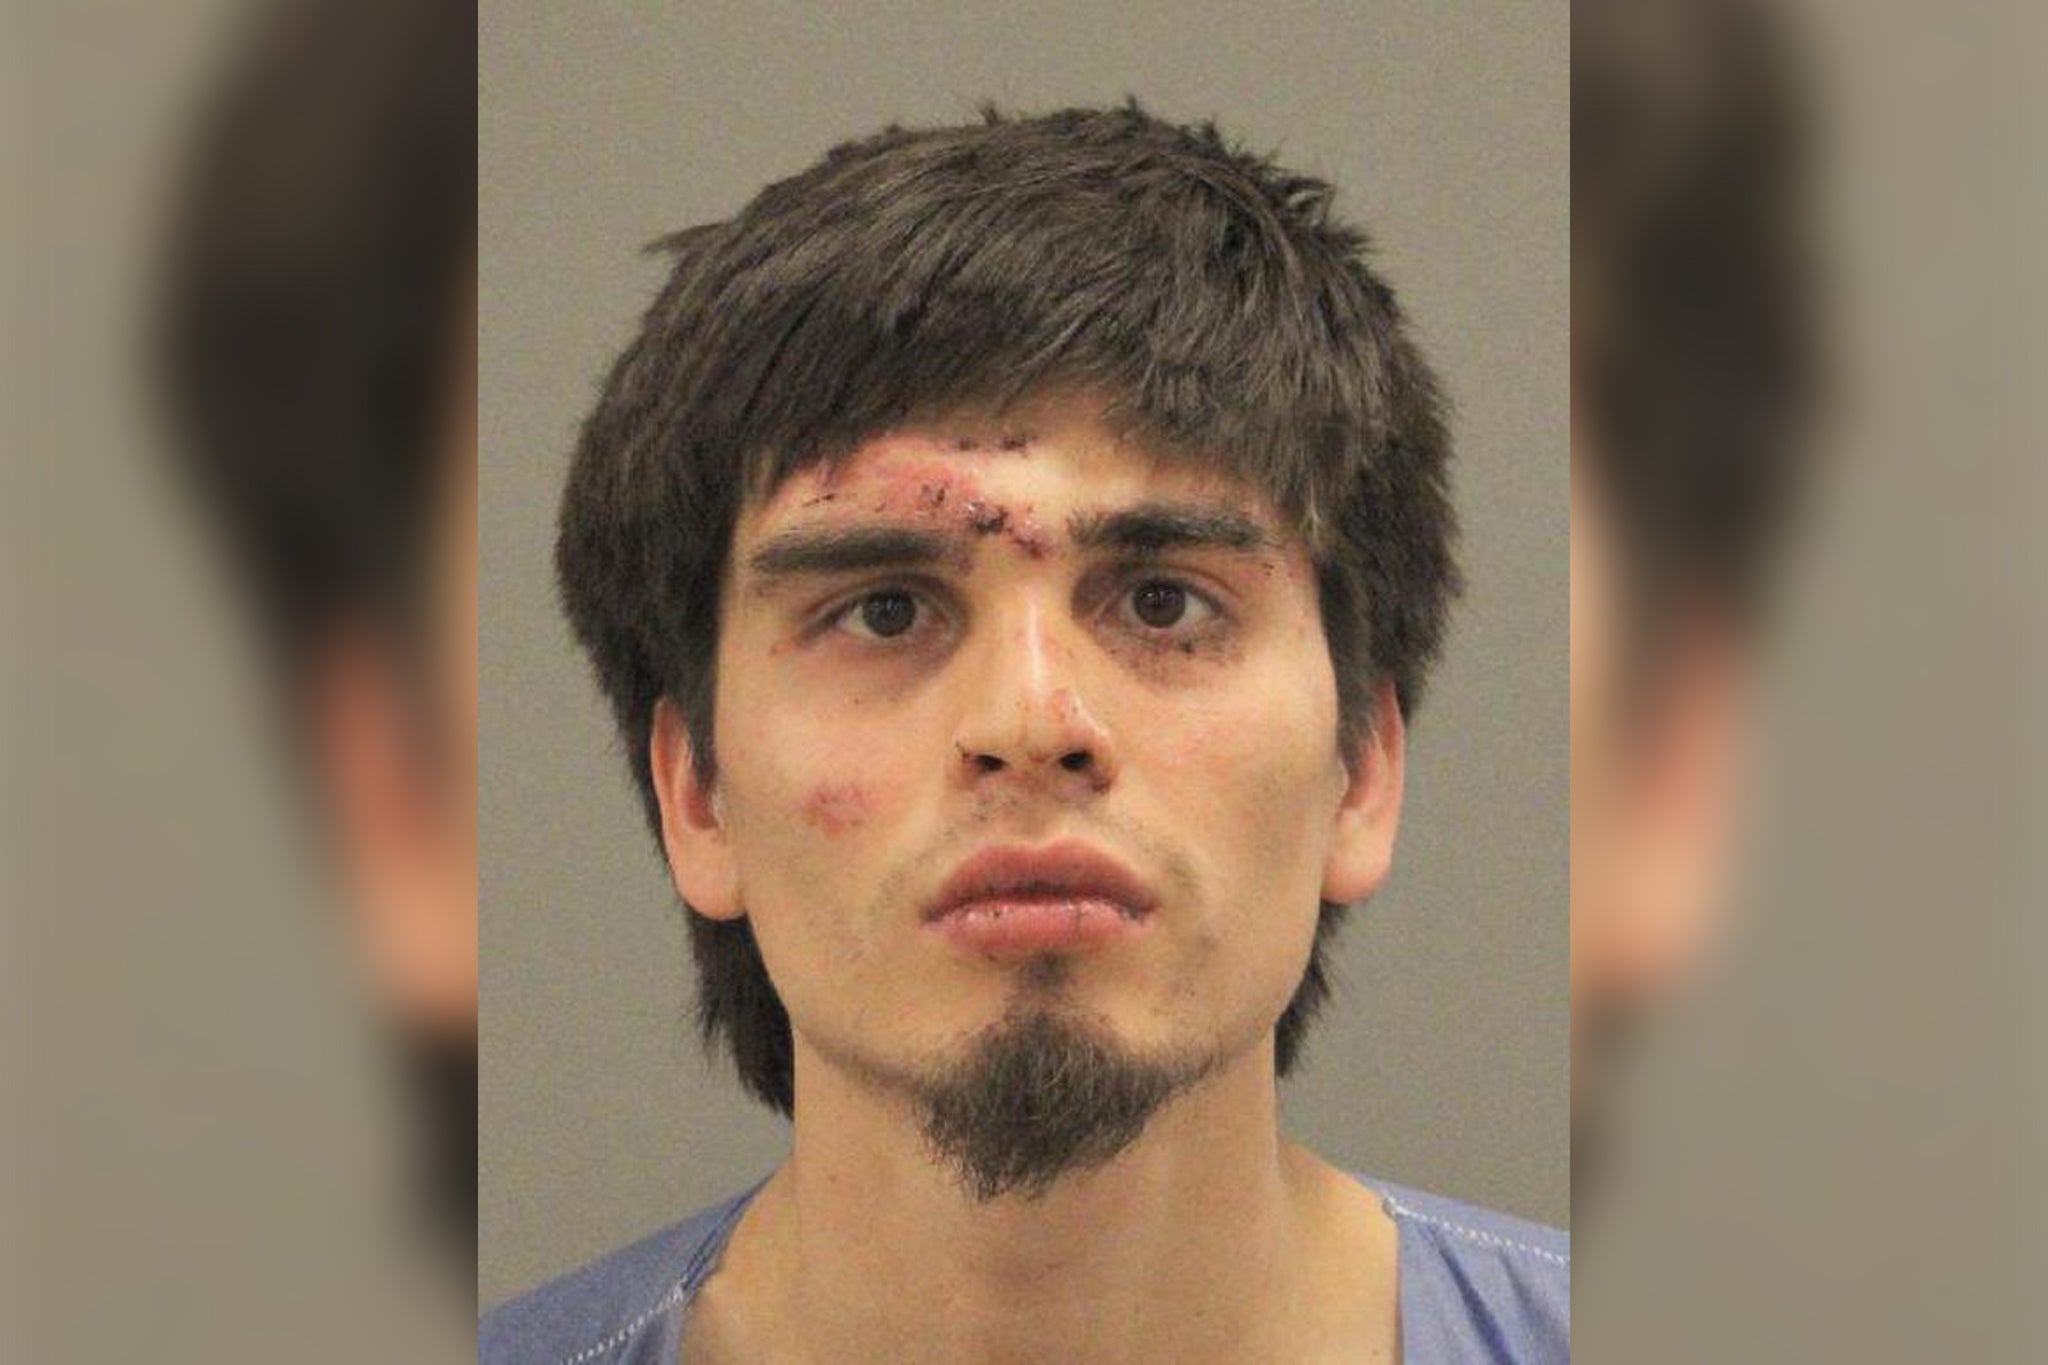 Christian Soto, 22, is facing multiple murder and attempted murder charges